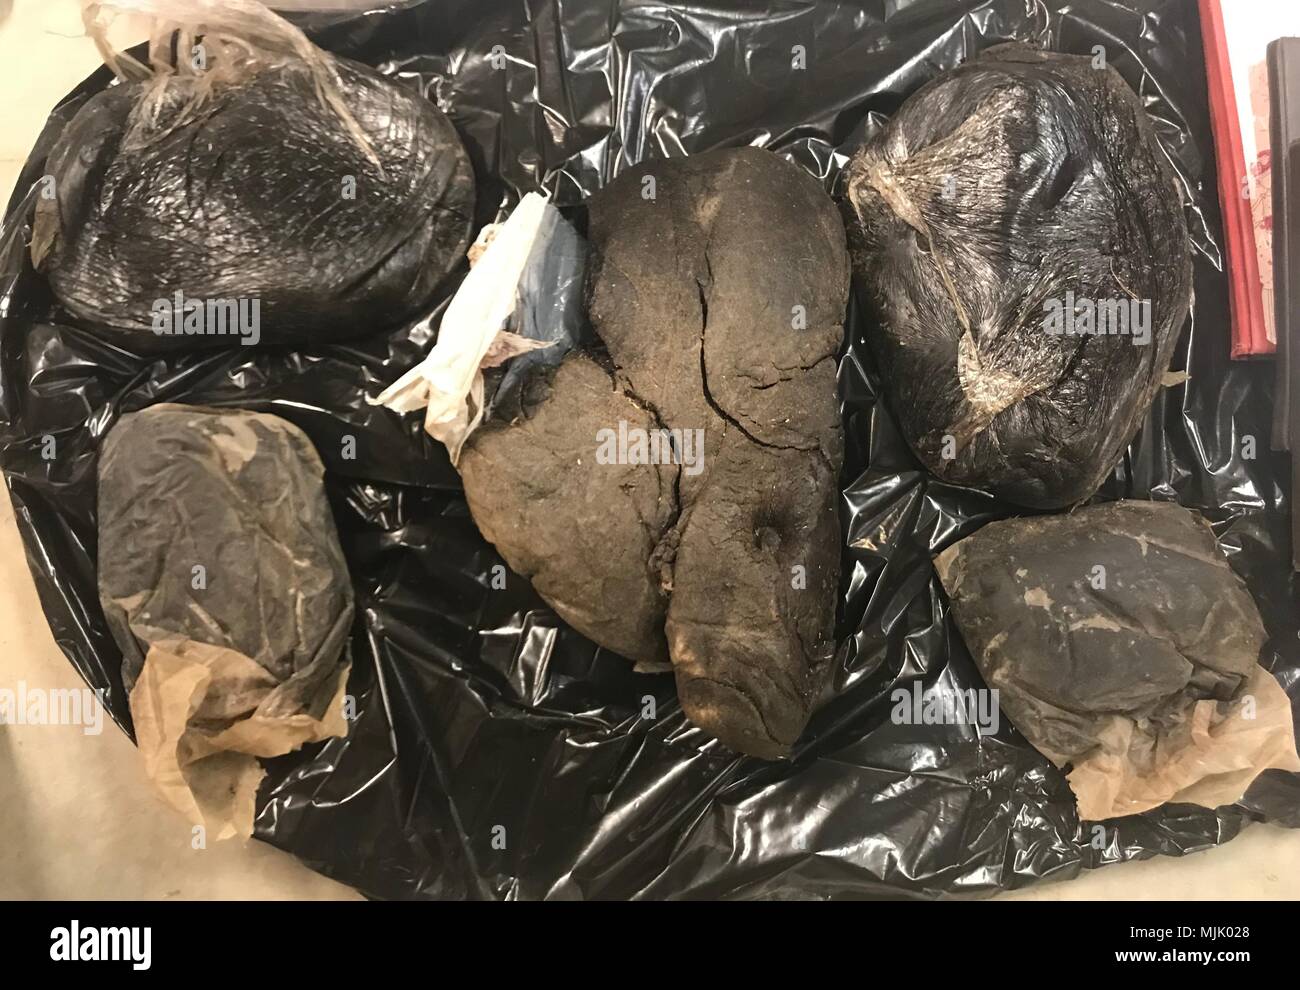 50kg of black tar heroin, valued at $4.6 million, was seized by the Afghan Special Security Forces during night raids in Sangin district, Helmand province, Afghanistan, Dec. 2-3, 2017. (U.S. Army photo) Stock Photo